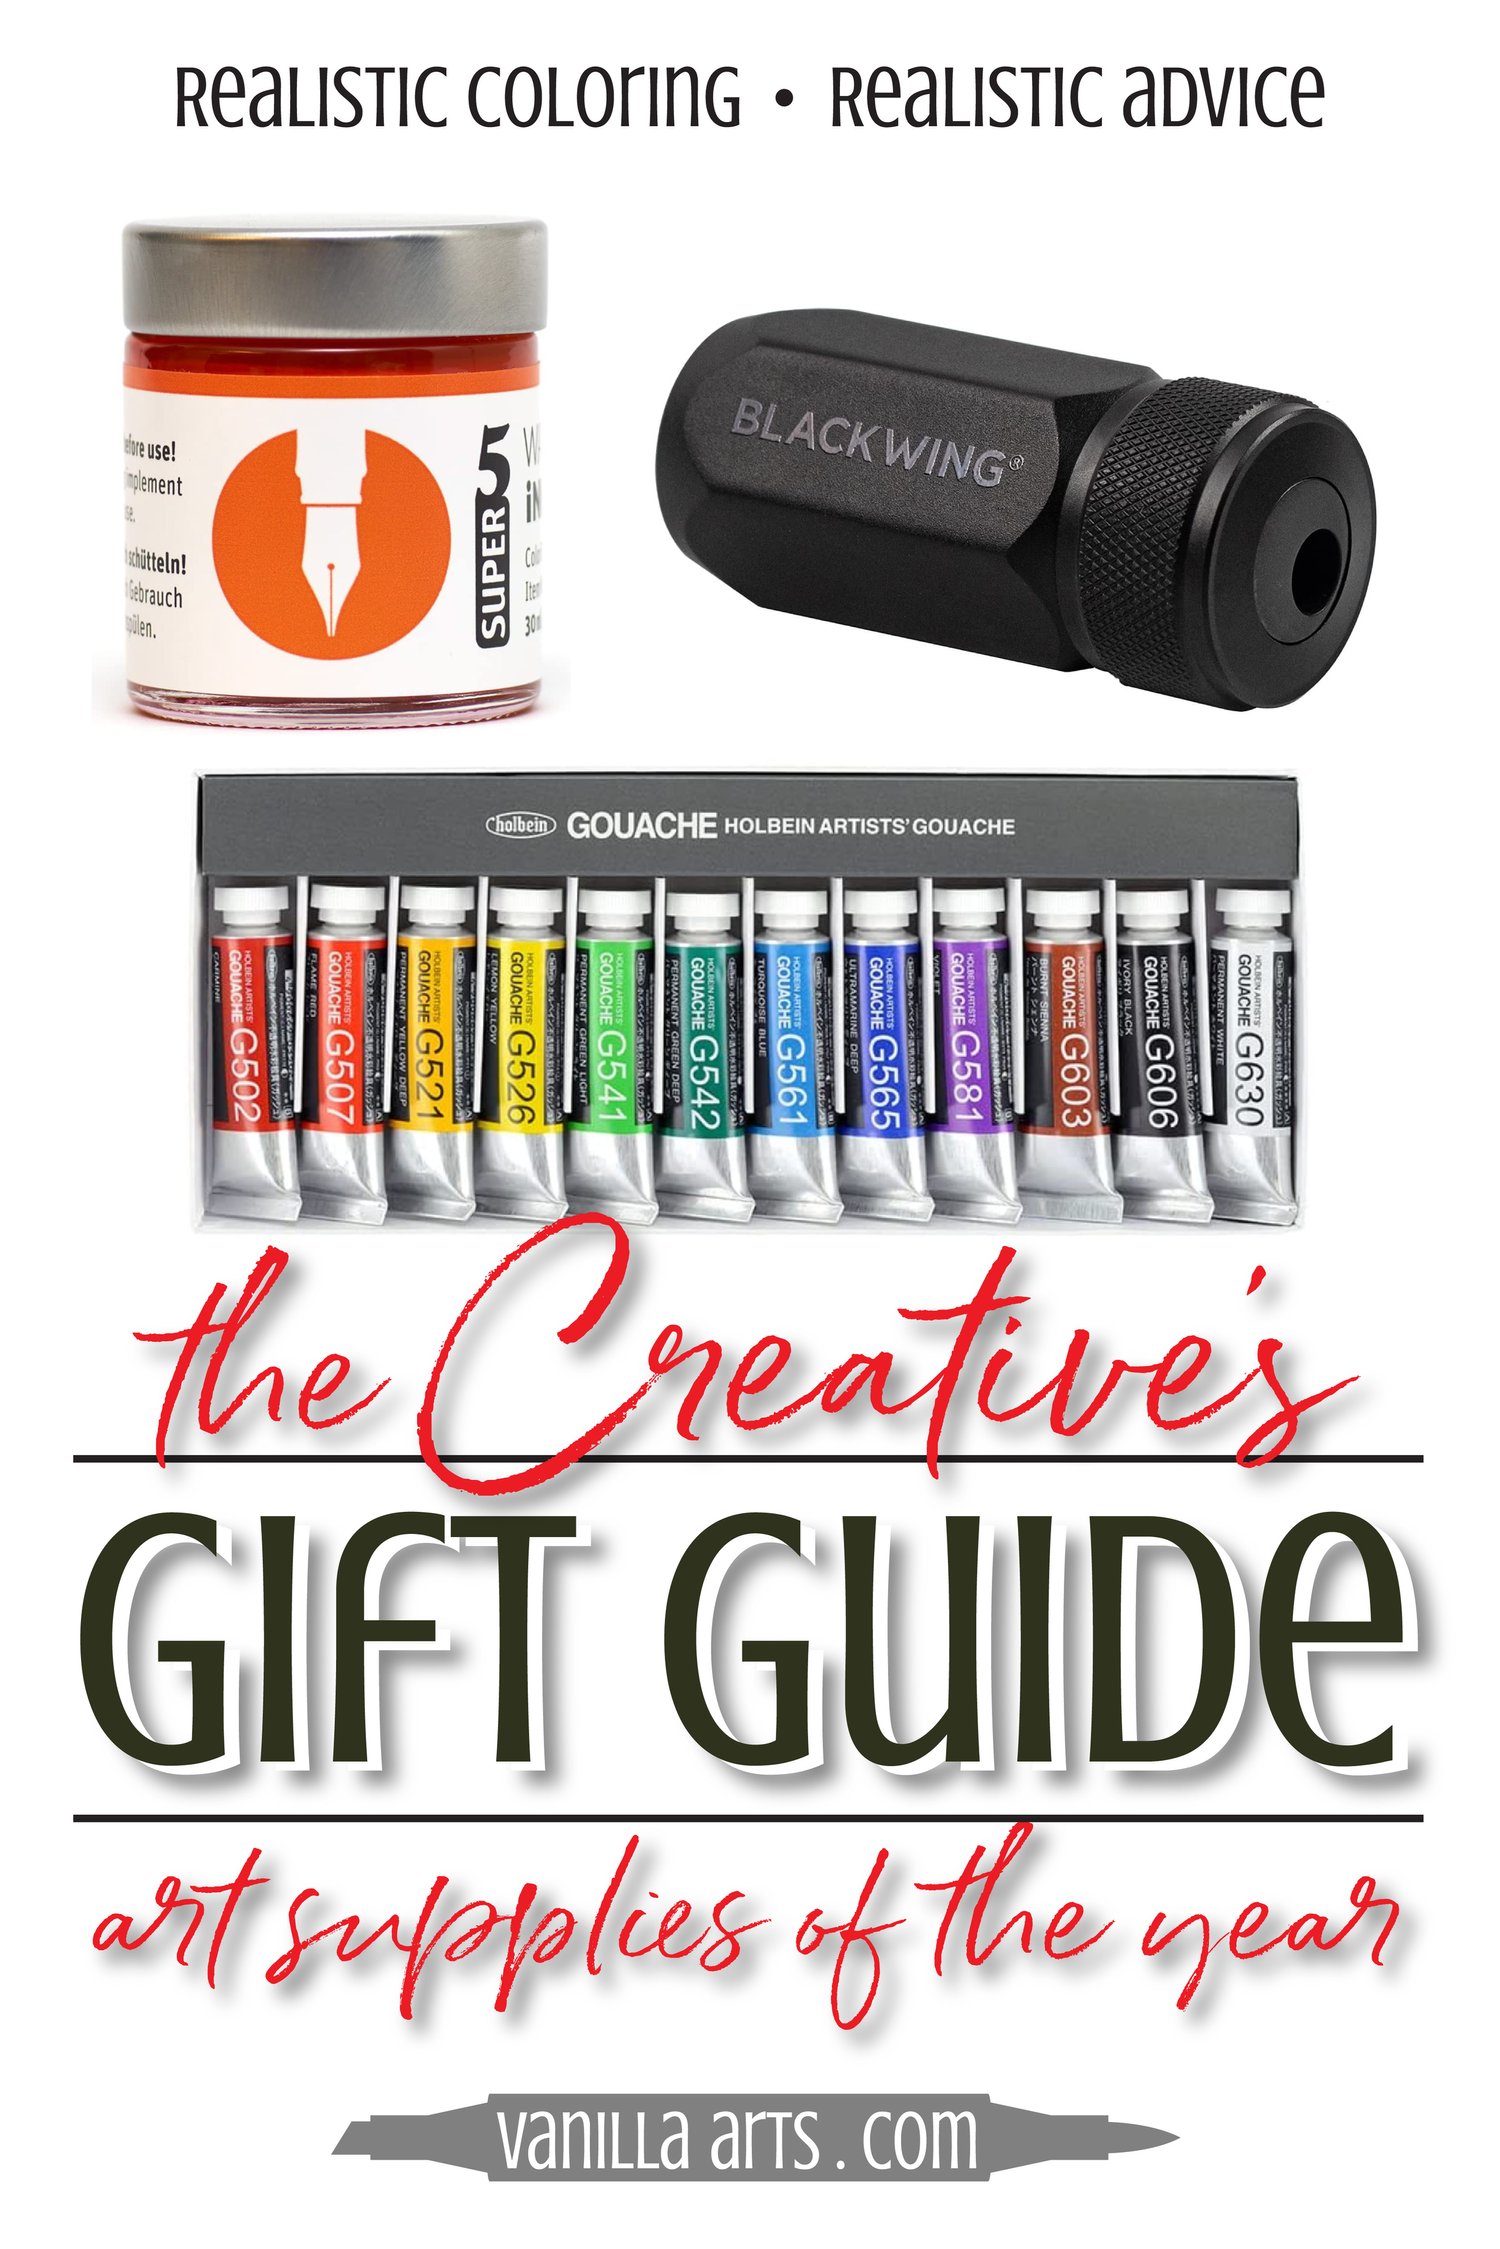 Top Coloring Supplies - Fan favorite art supplies for adults